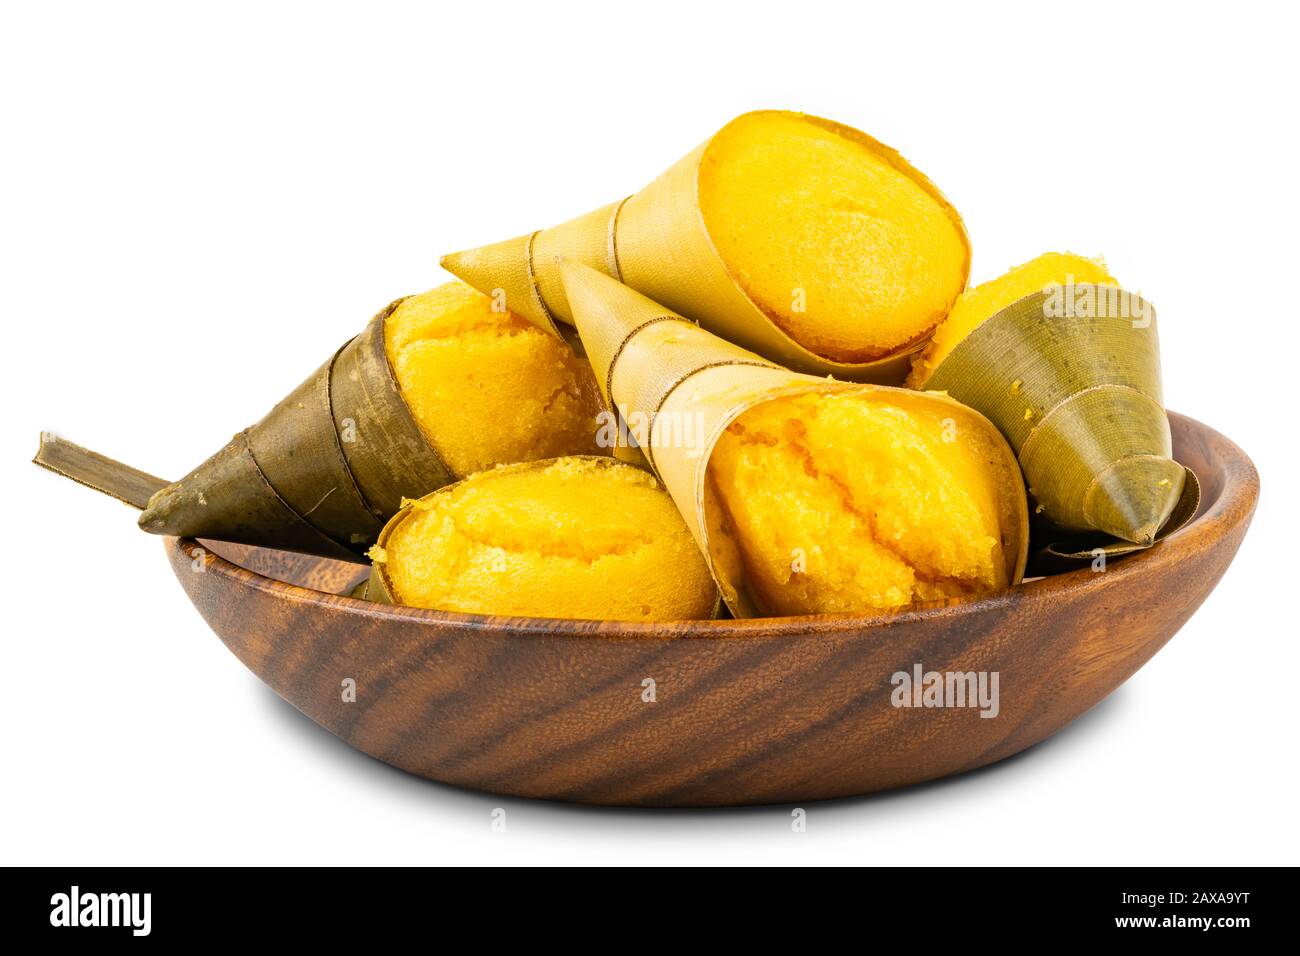 Pile of Toddy Palm Cake or Kanom Tarn, the local Thai dessert in wooden bowl on white background with clipping path Stock Photo